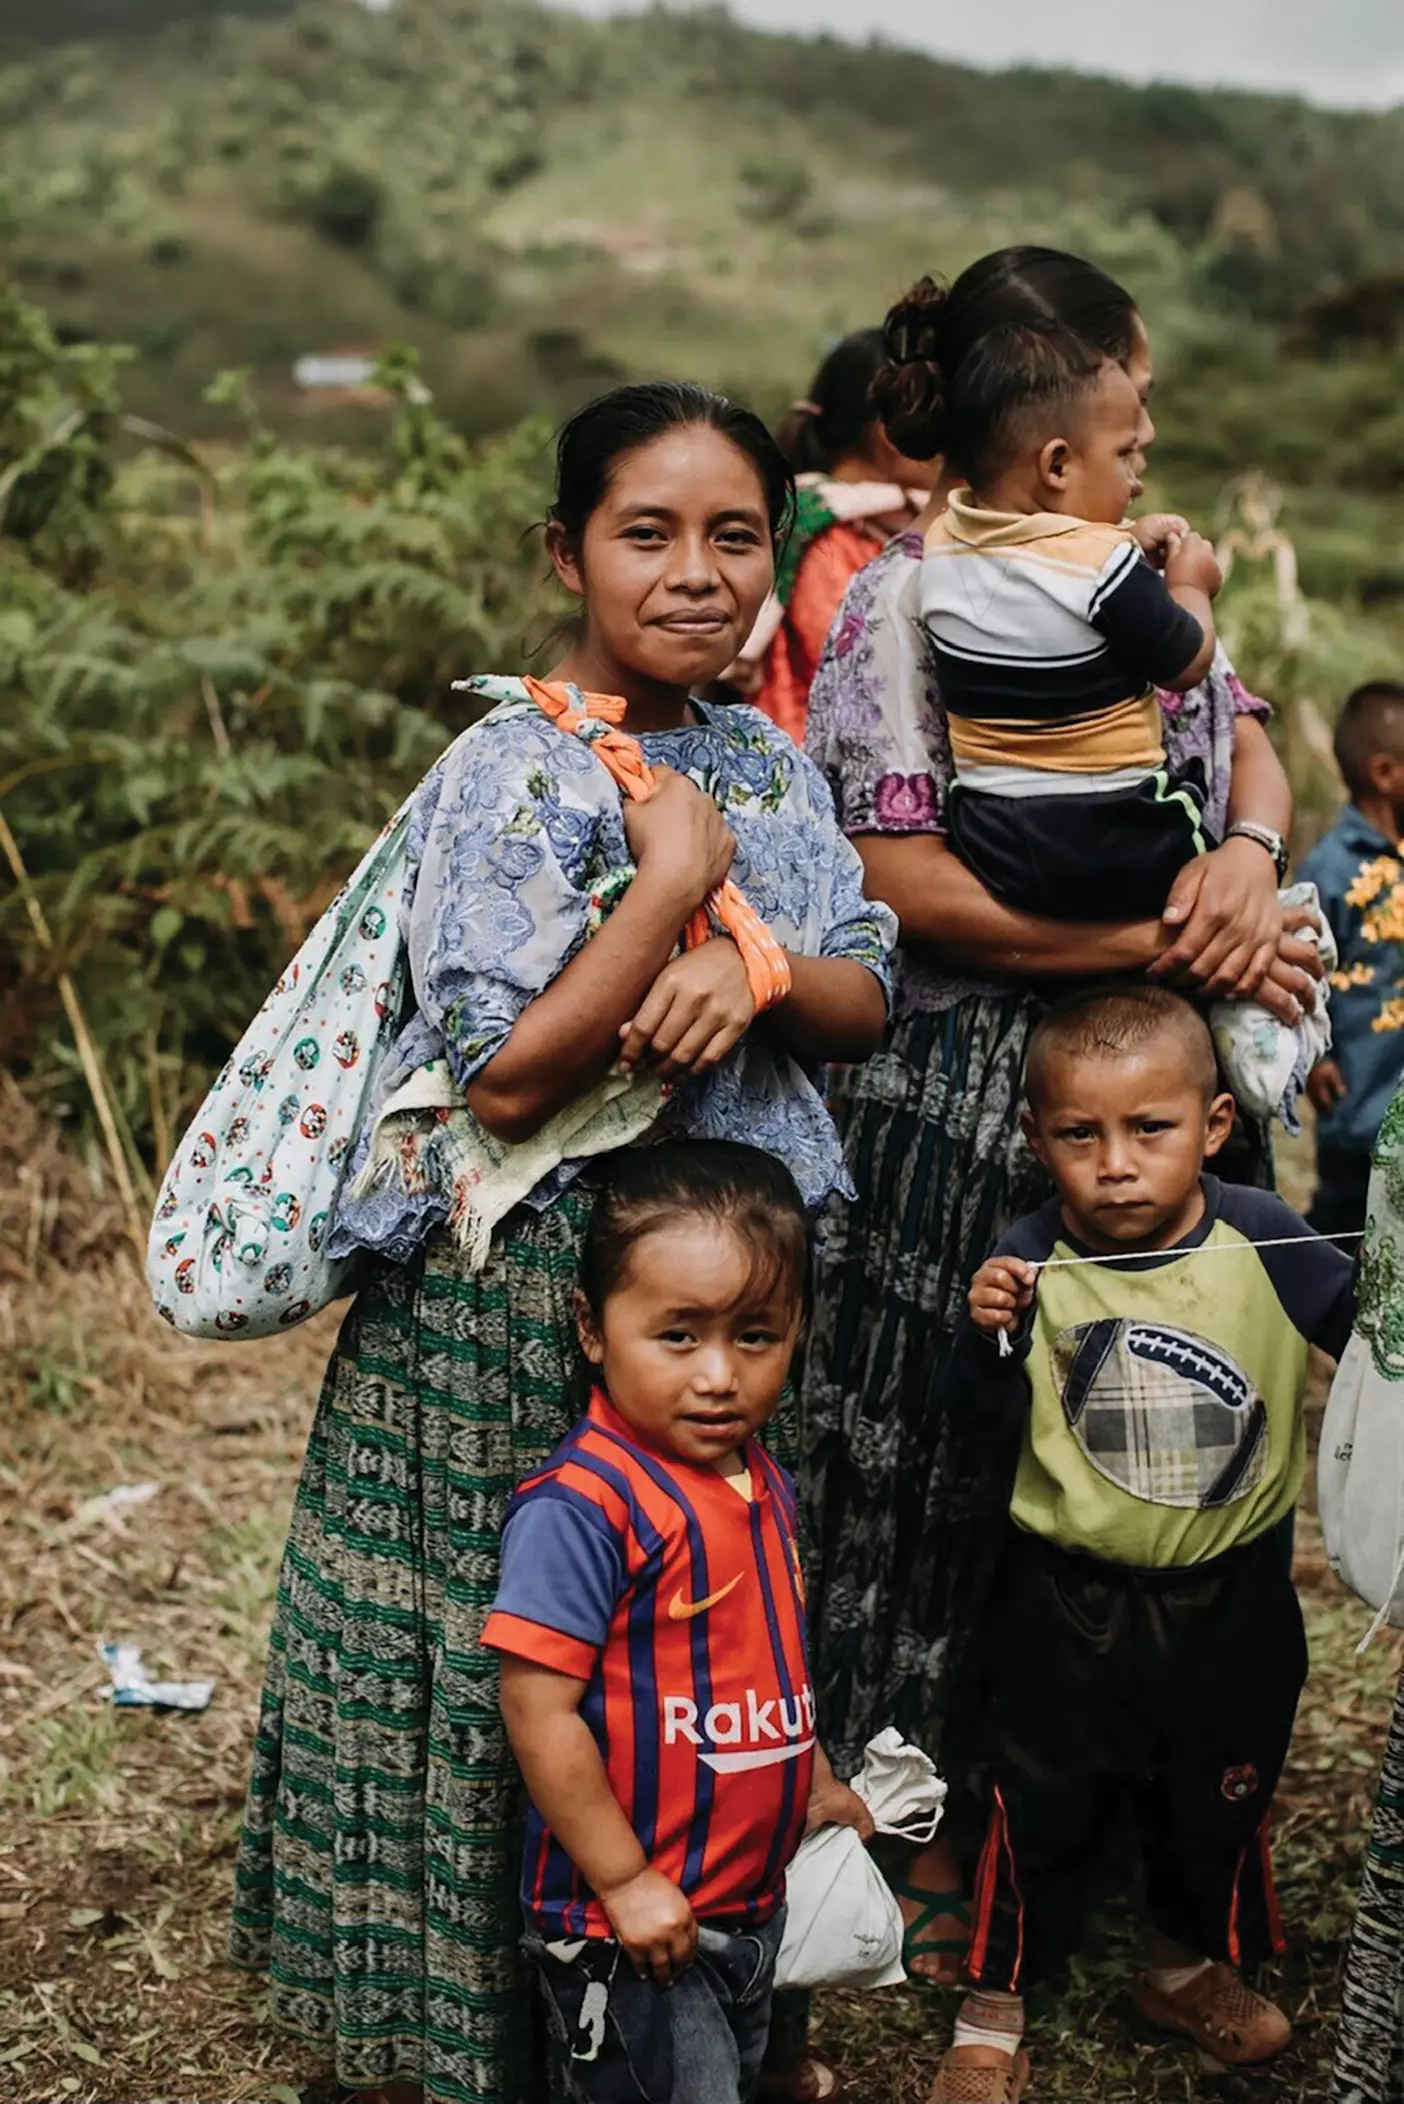 A mom and her kids in Guatemala